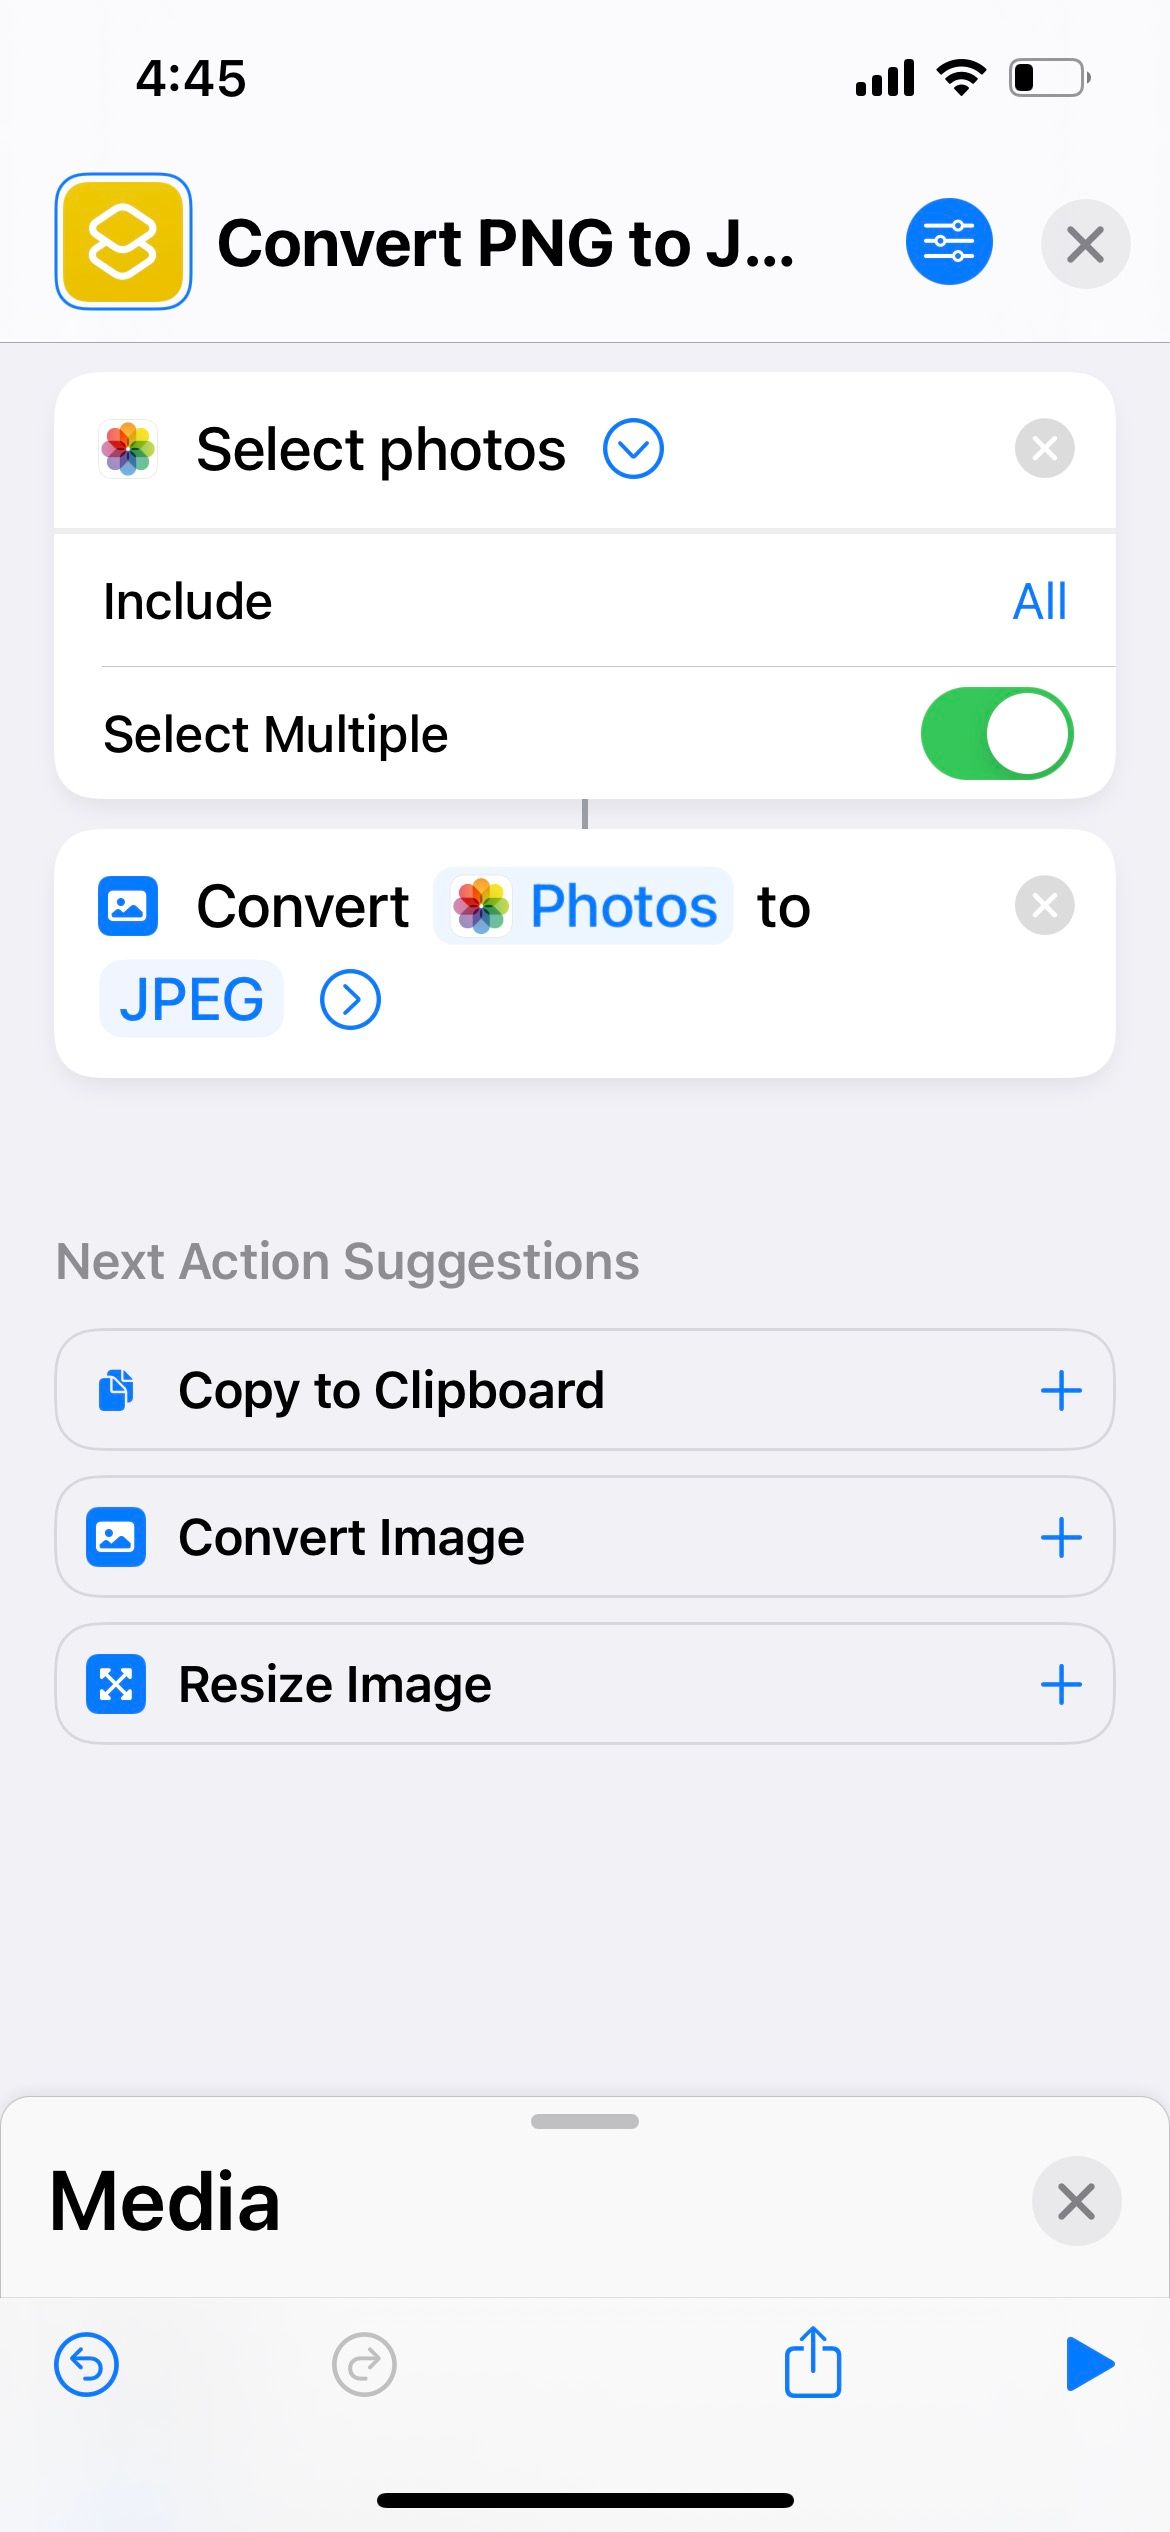 select photos and convert to jpeg actions added for iphone shortcut 